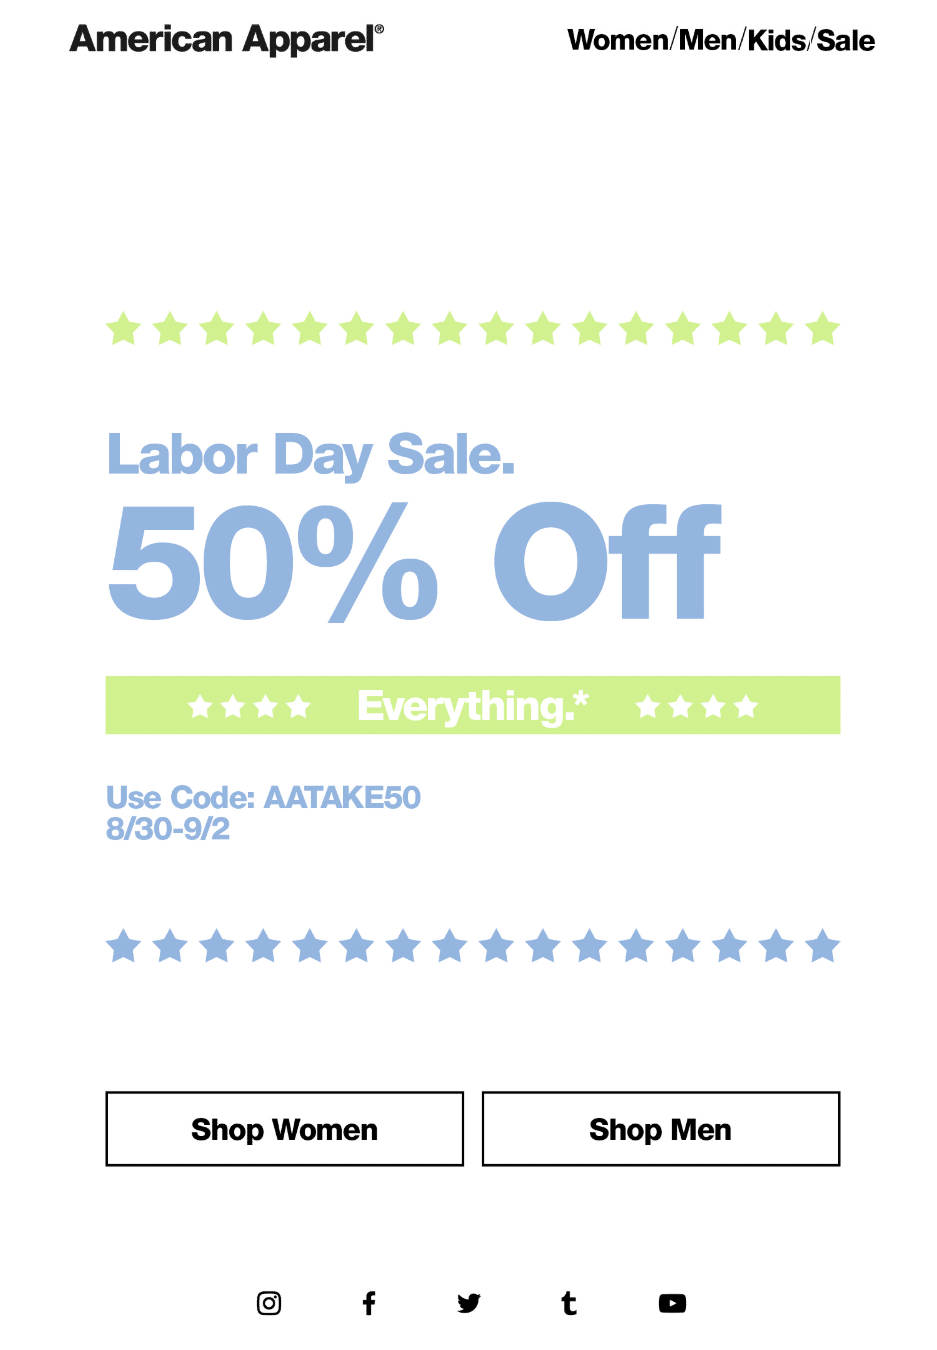  American Apparel Labor Day newsletter example